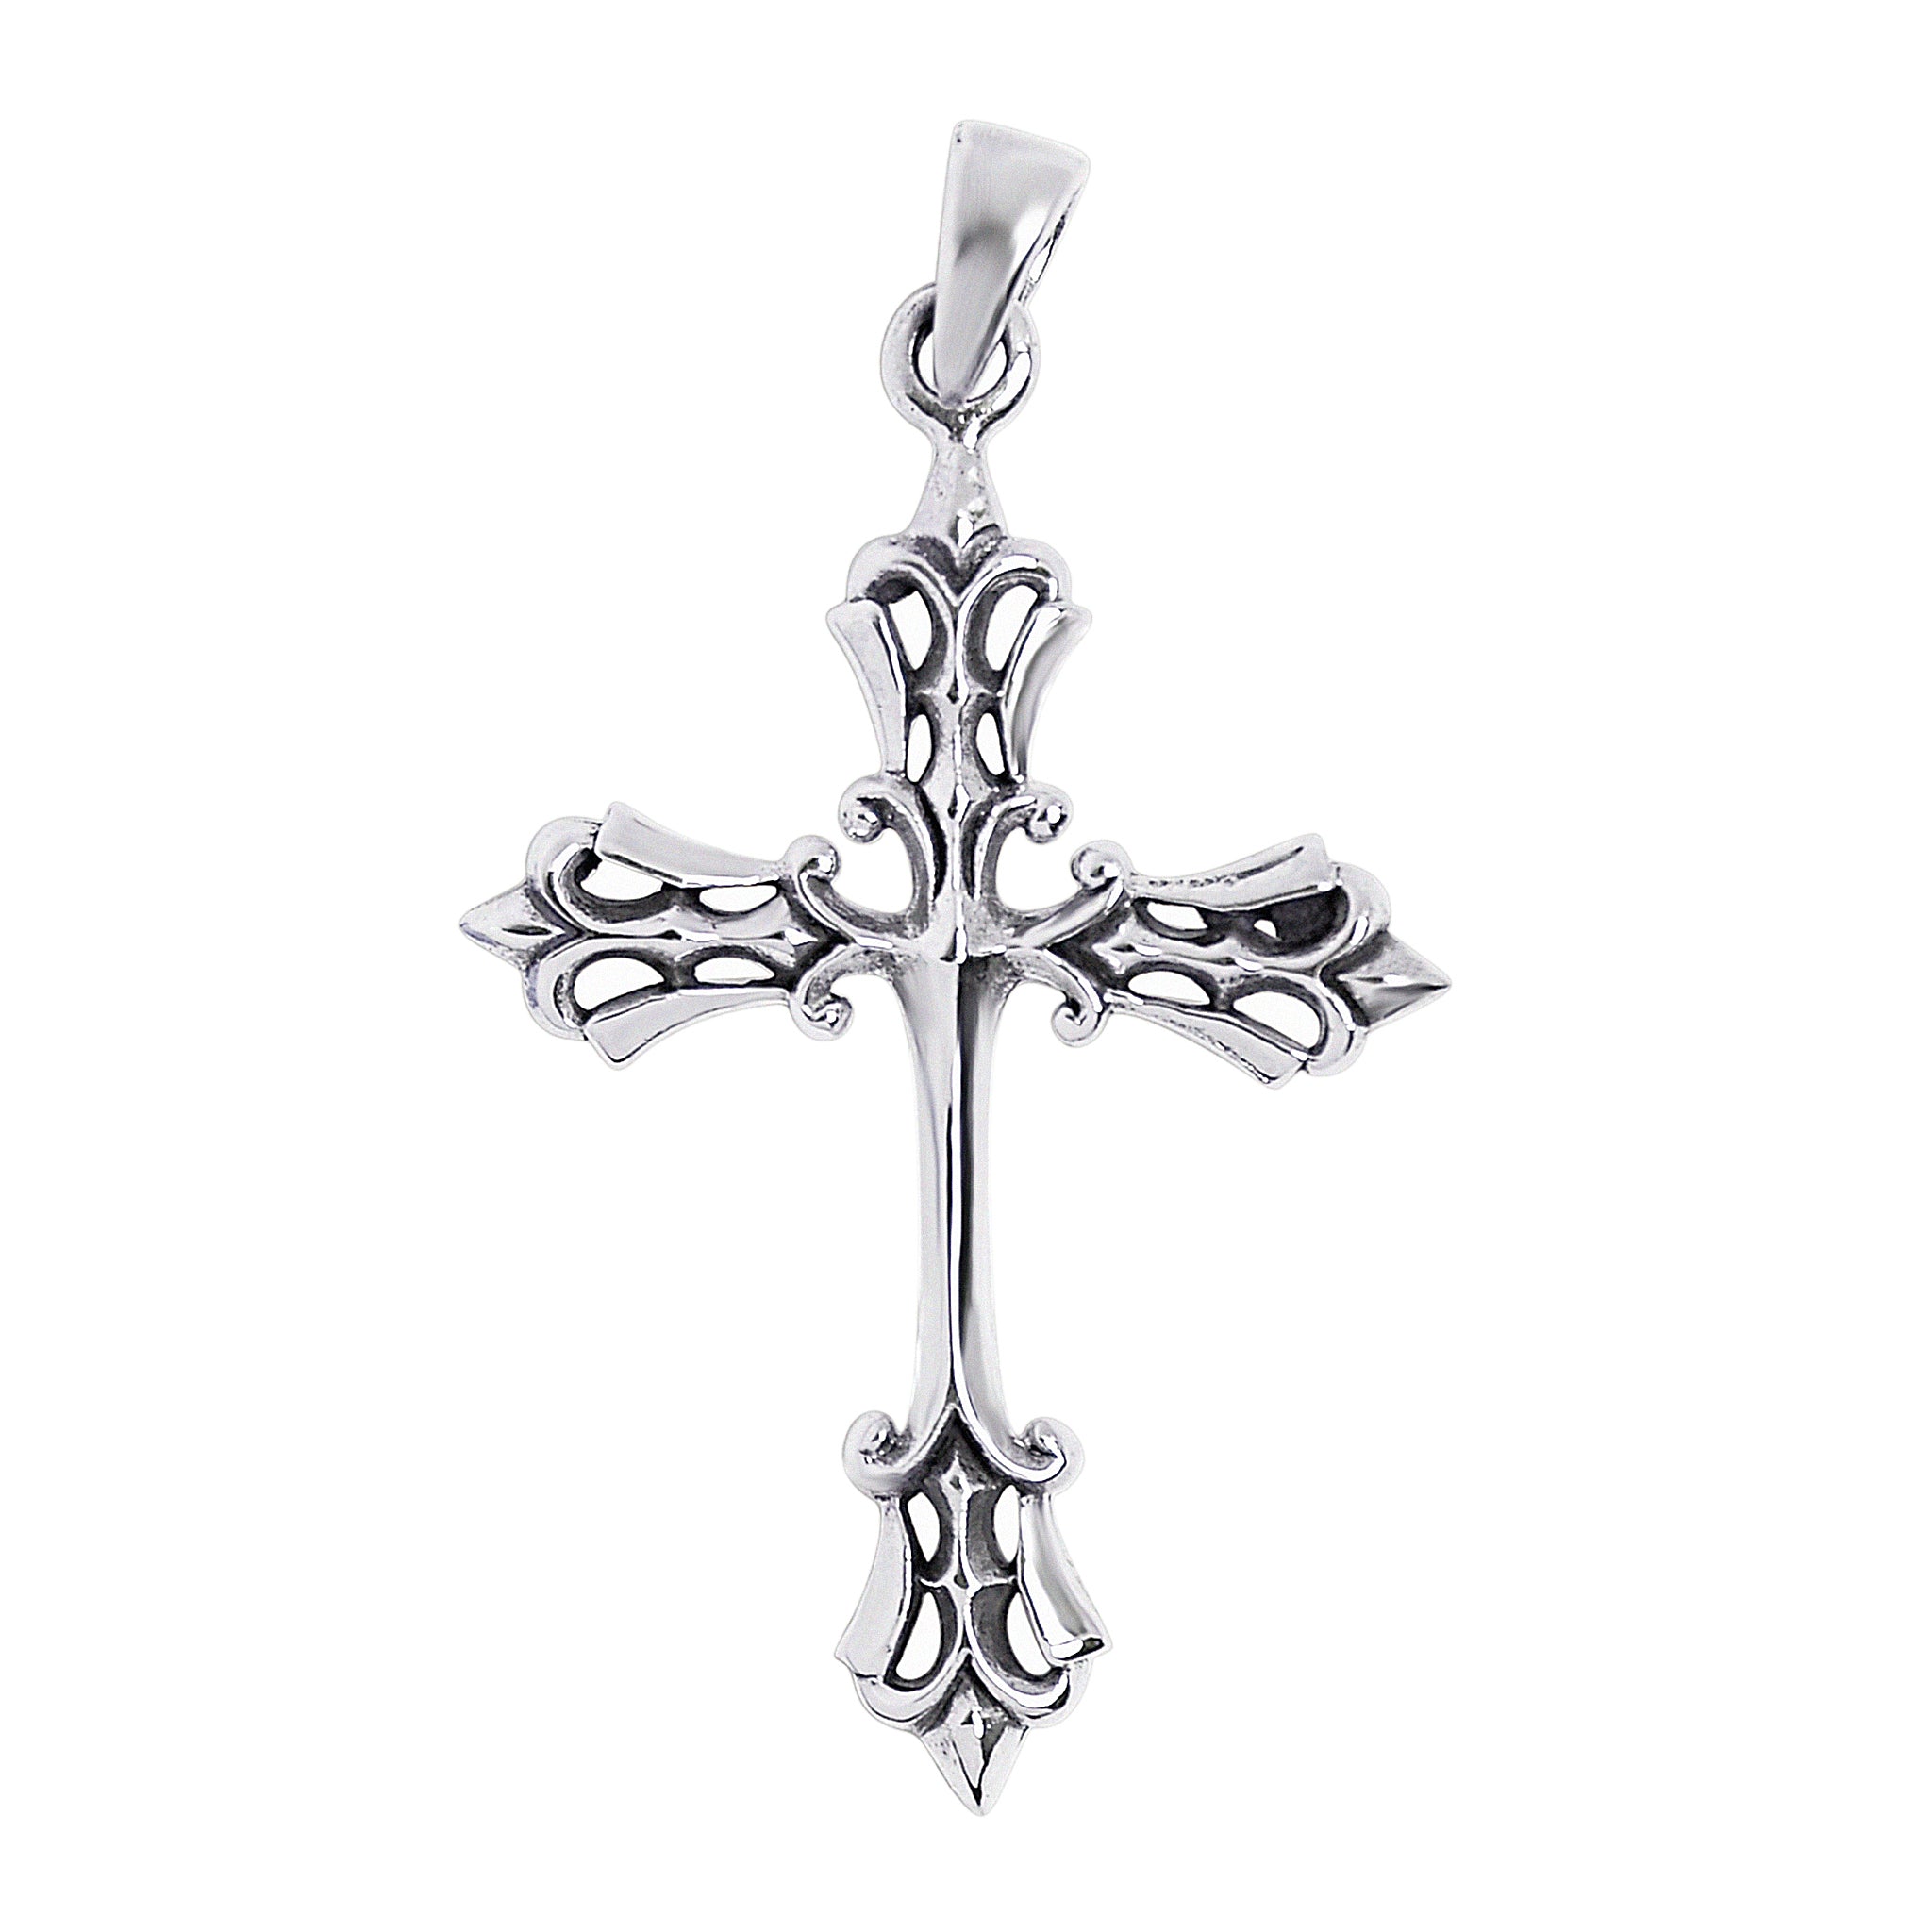 Sterling Silver Detailed Cross Pendant / SSP0021-nackles pendent- Silver Disc Pendant- Bridesmaid Gift- Silver Cross Pendant- Handmade Silver Necklace